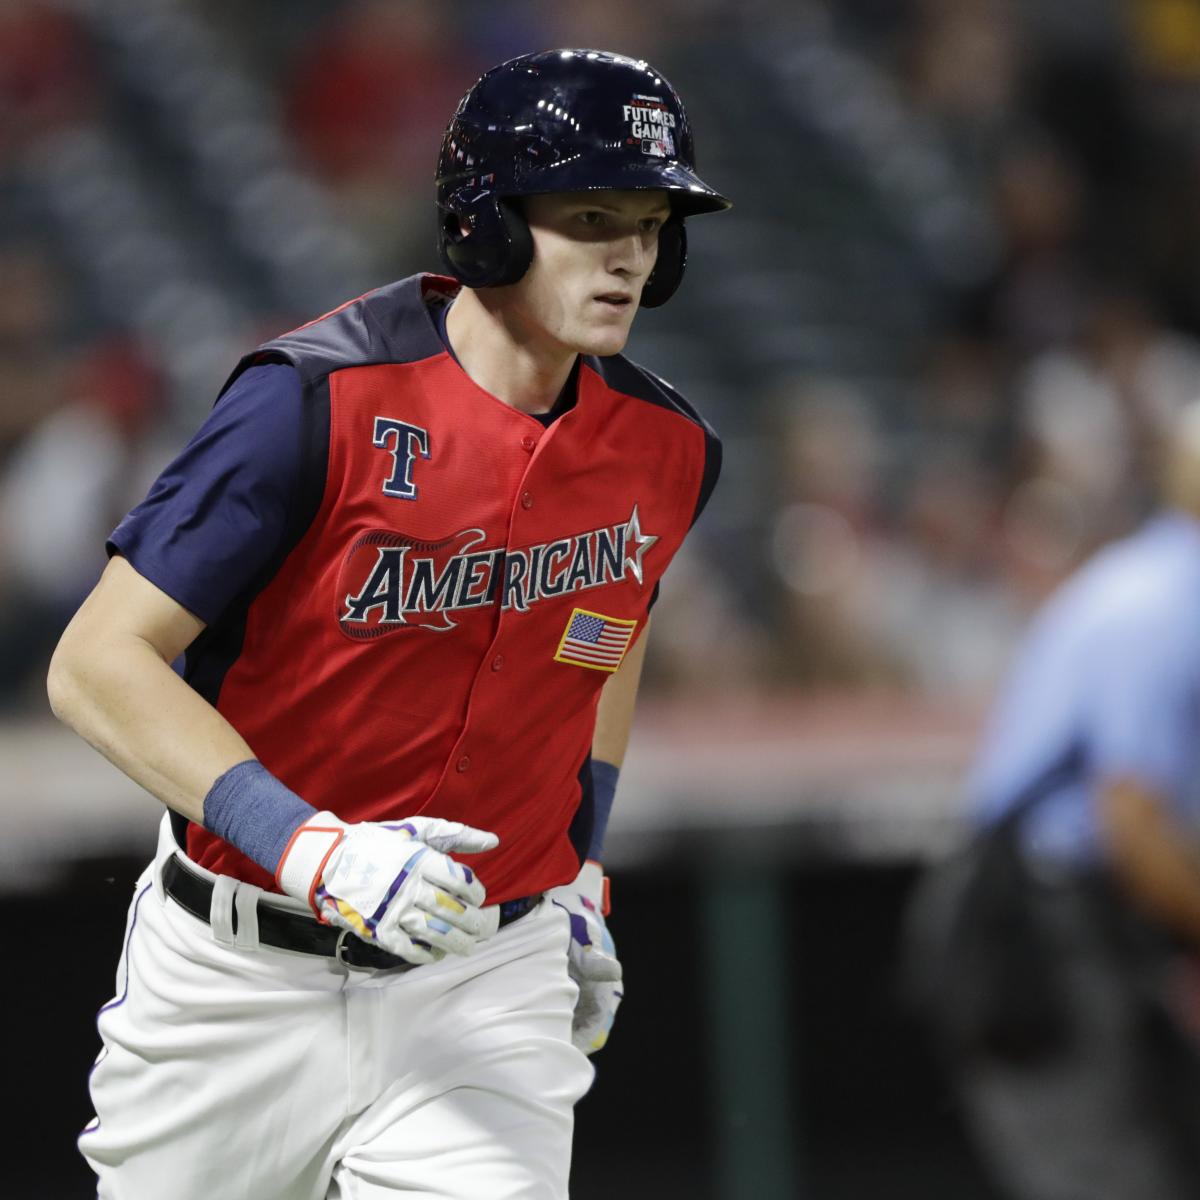 MLB Futures Game 2019 Results Score, Highlights, Top Prospects and